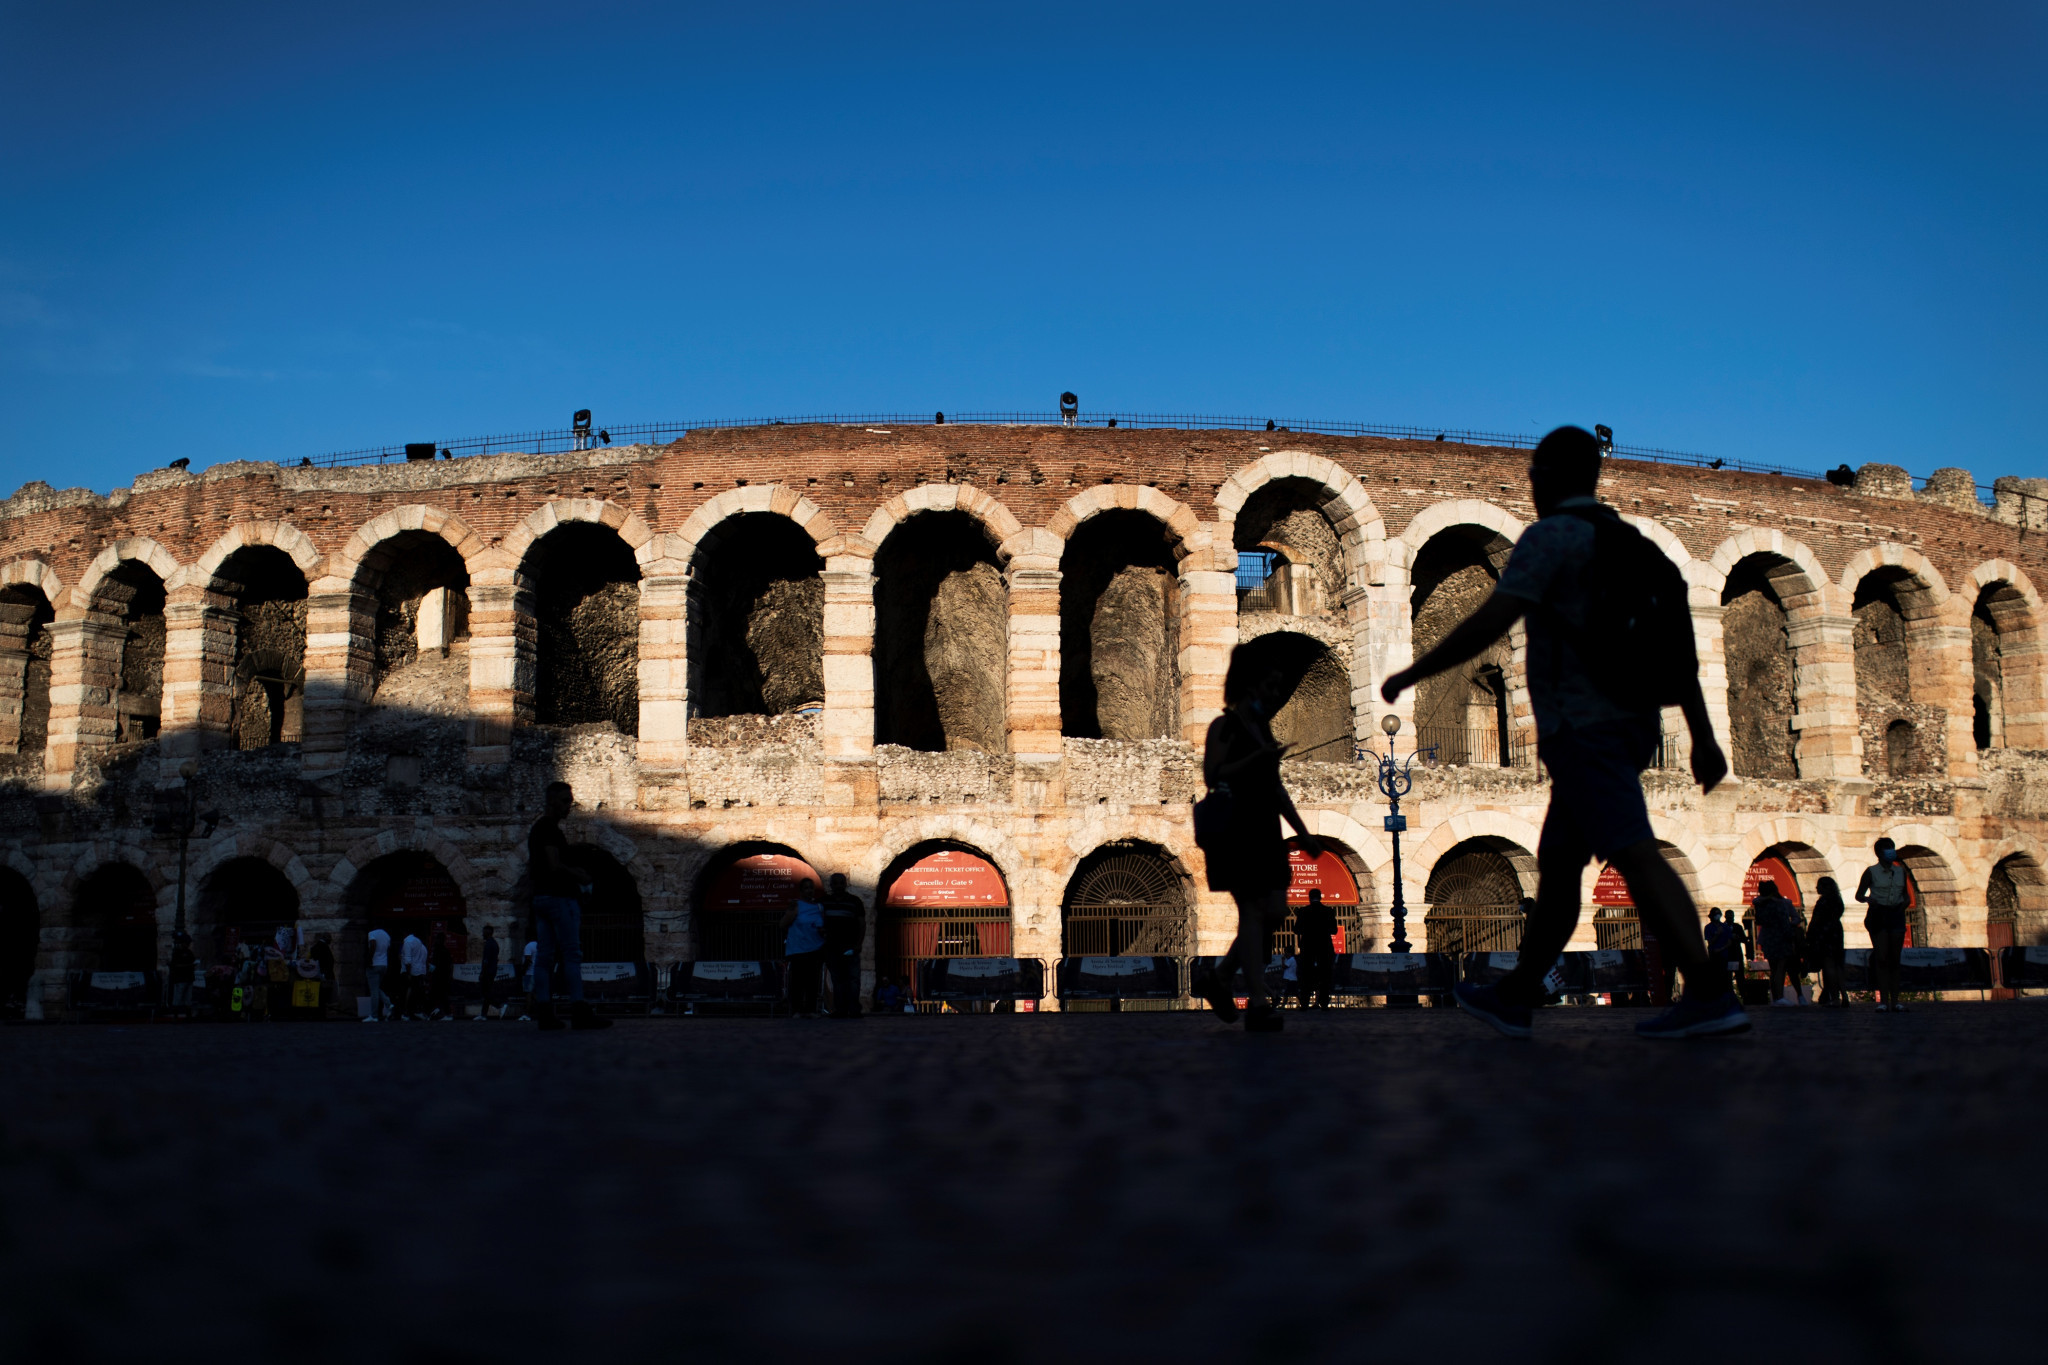 The Verona Arena is set to receive €18 million to be upgraded for Milan Cortina 2026 ©Getty Images